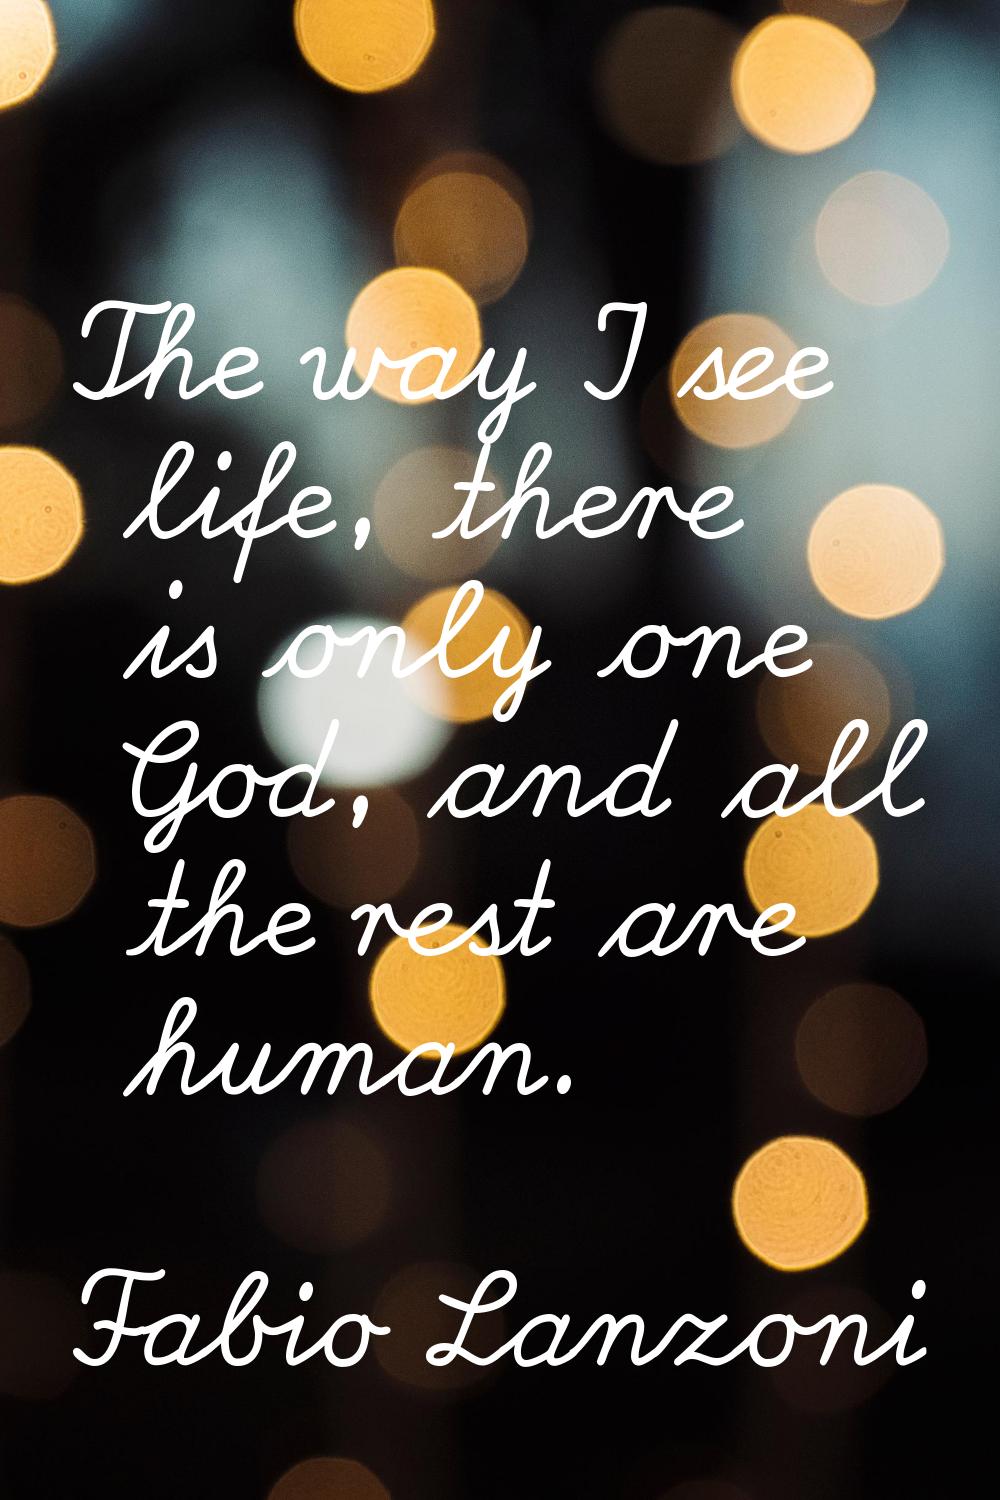 The way I see life, there is only one God, and all the rest are human.